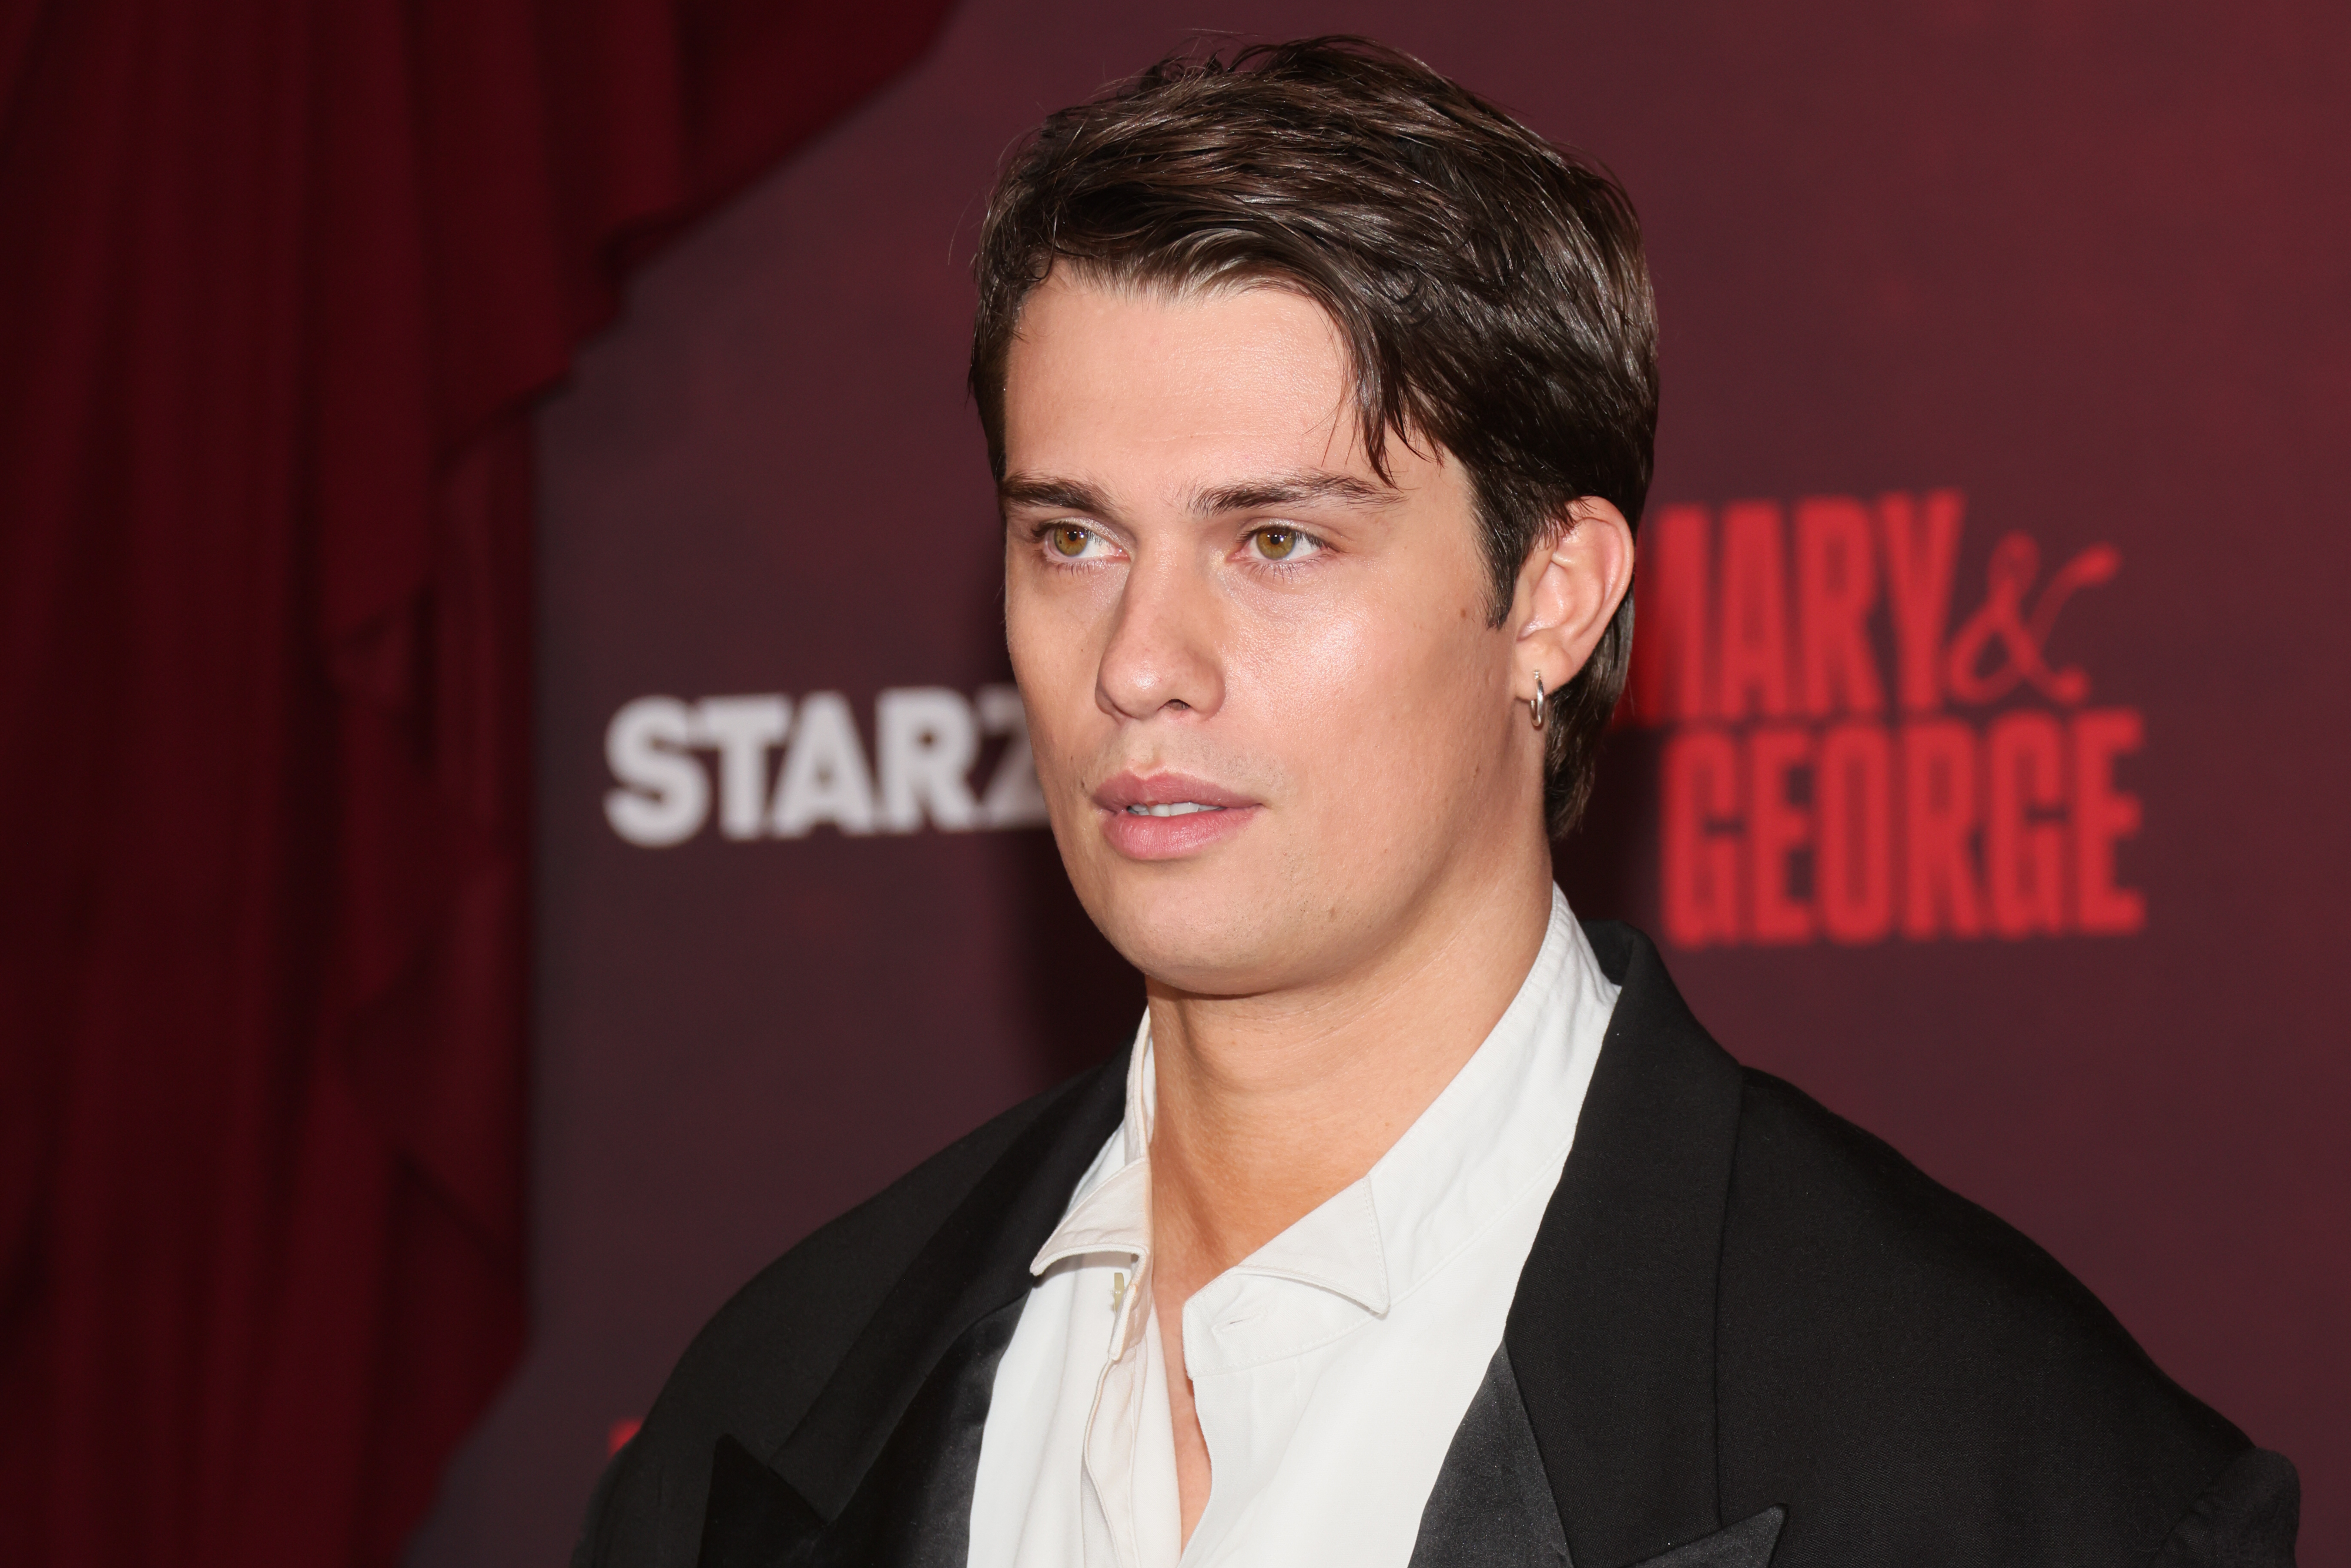 Nicholas Galitzine posing on the red carpet in a suit with an open-necked shirt, in front of a promotional backdrop